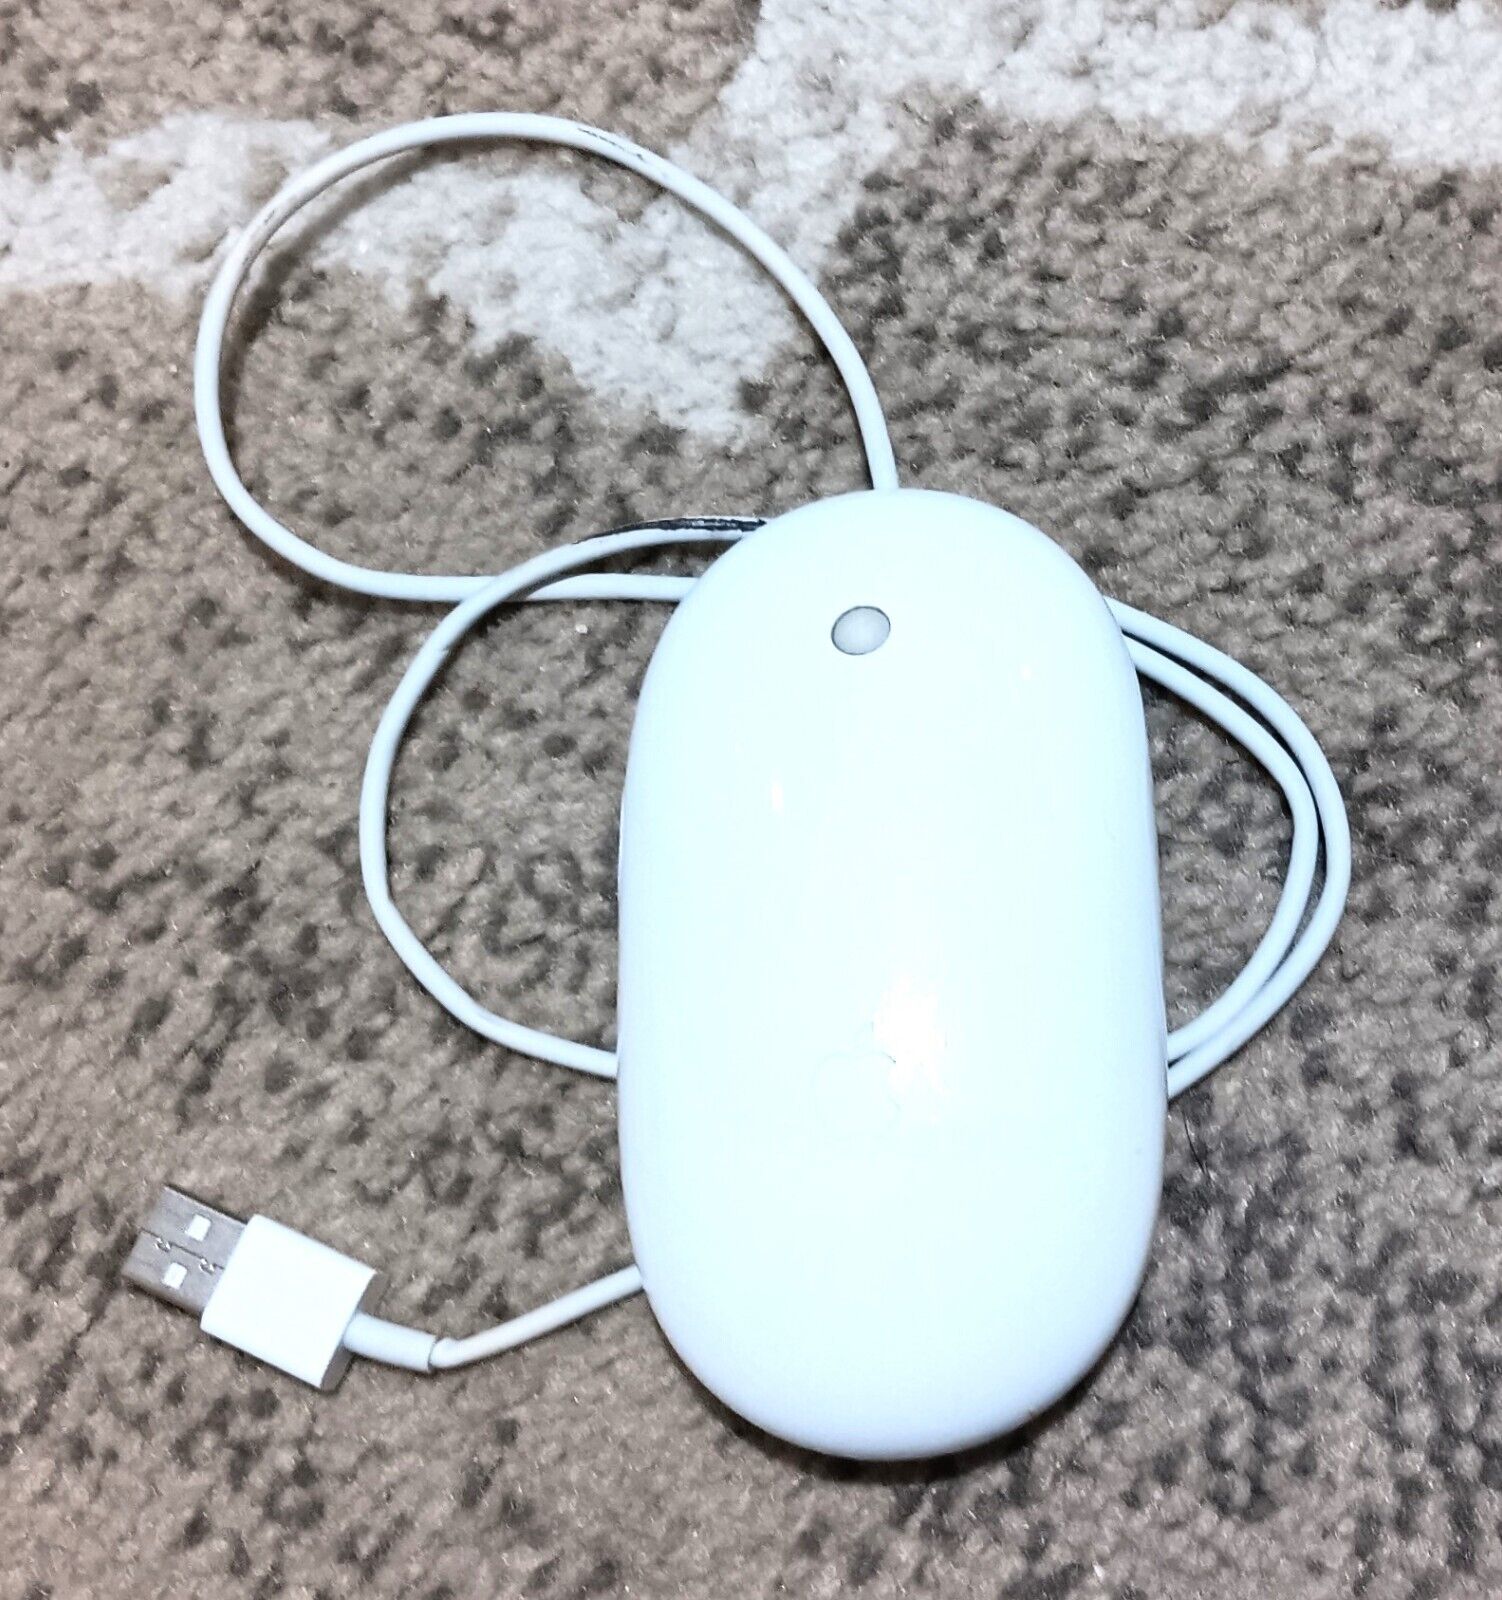 Vintage Apple Mighty Mouse AA1152 Wired USB